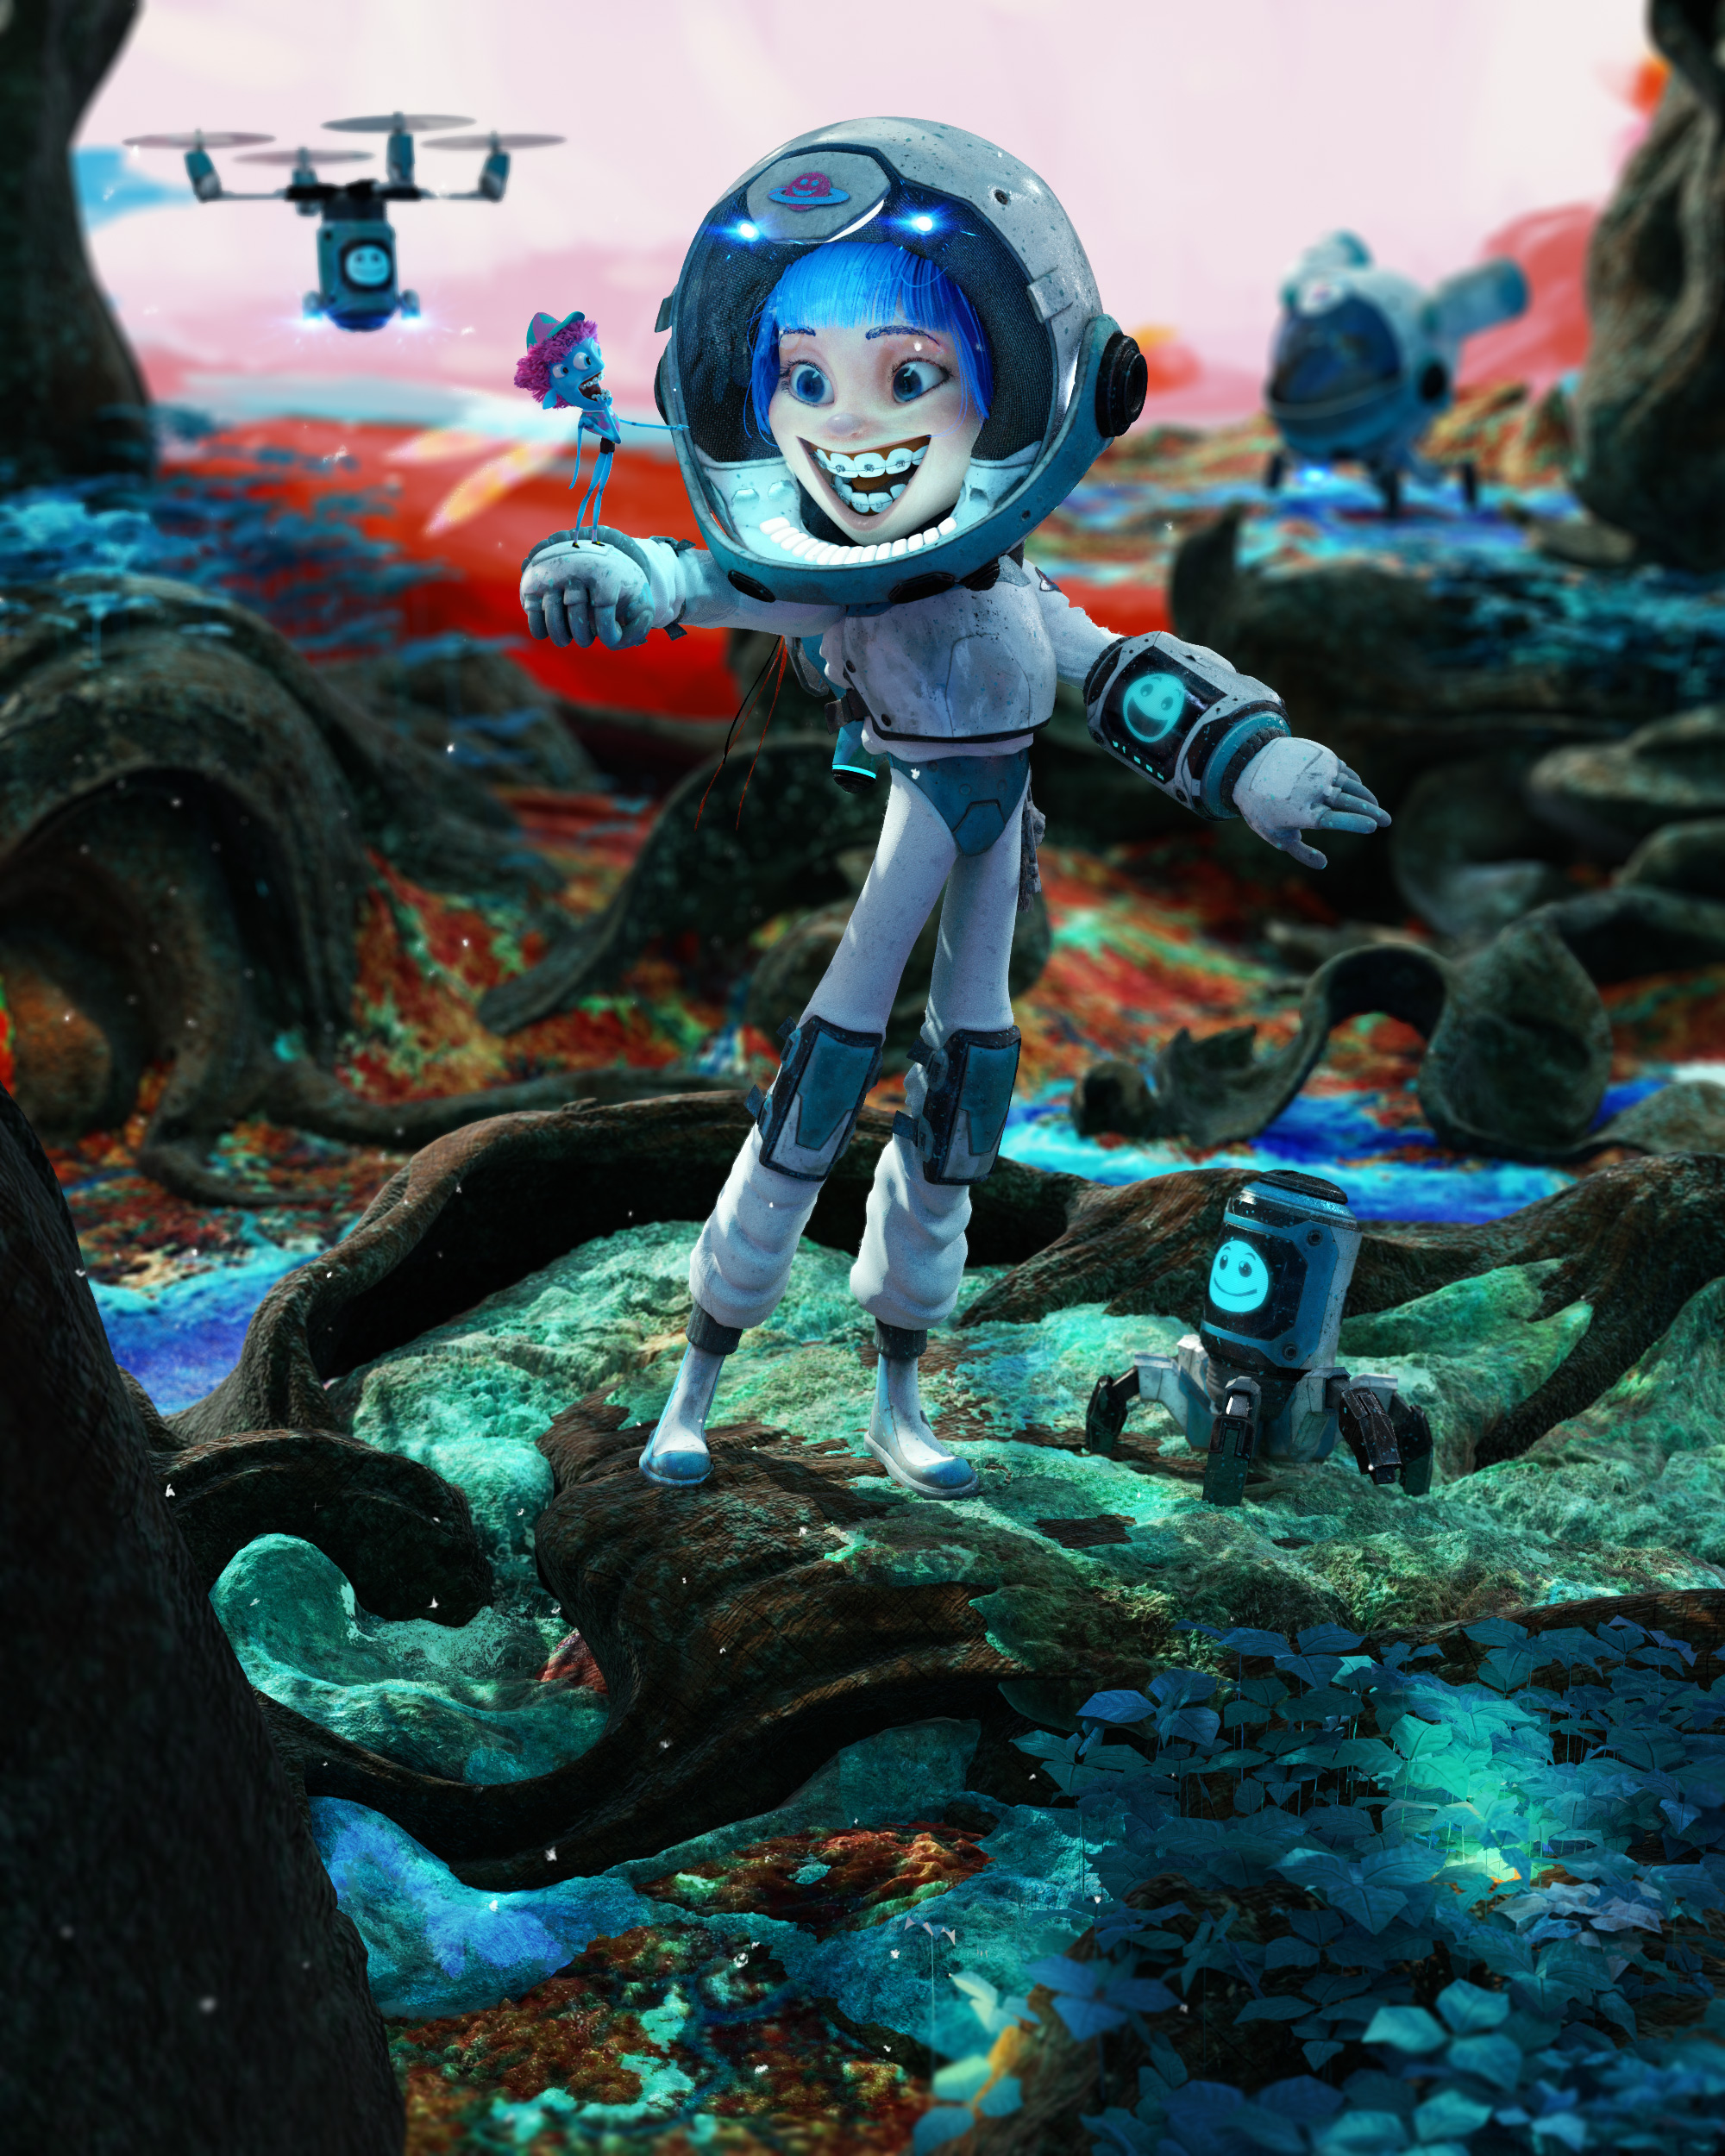 The Space Kid 3d art